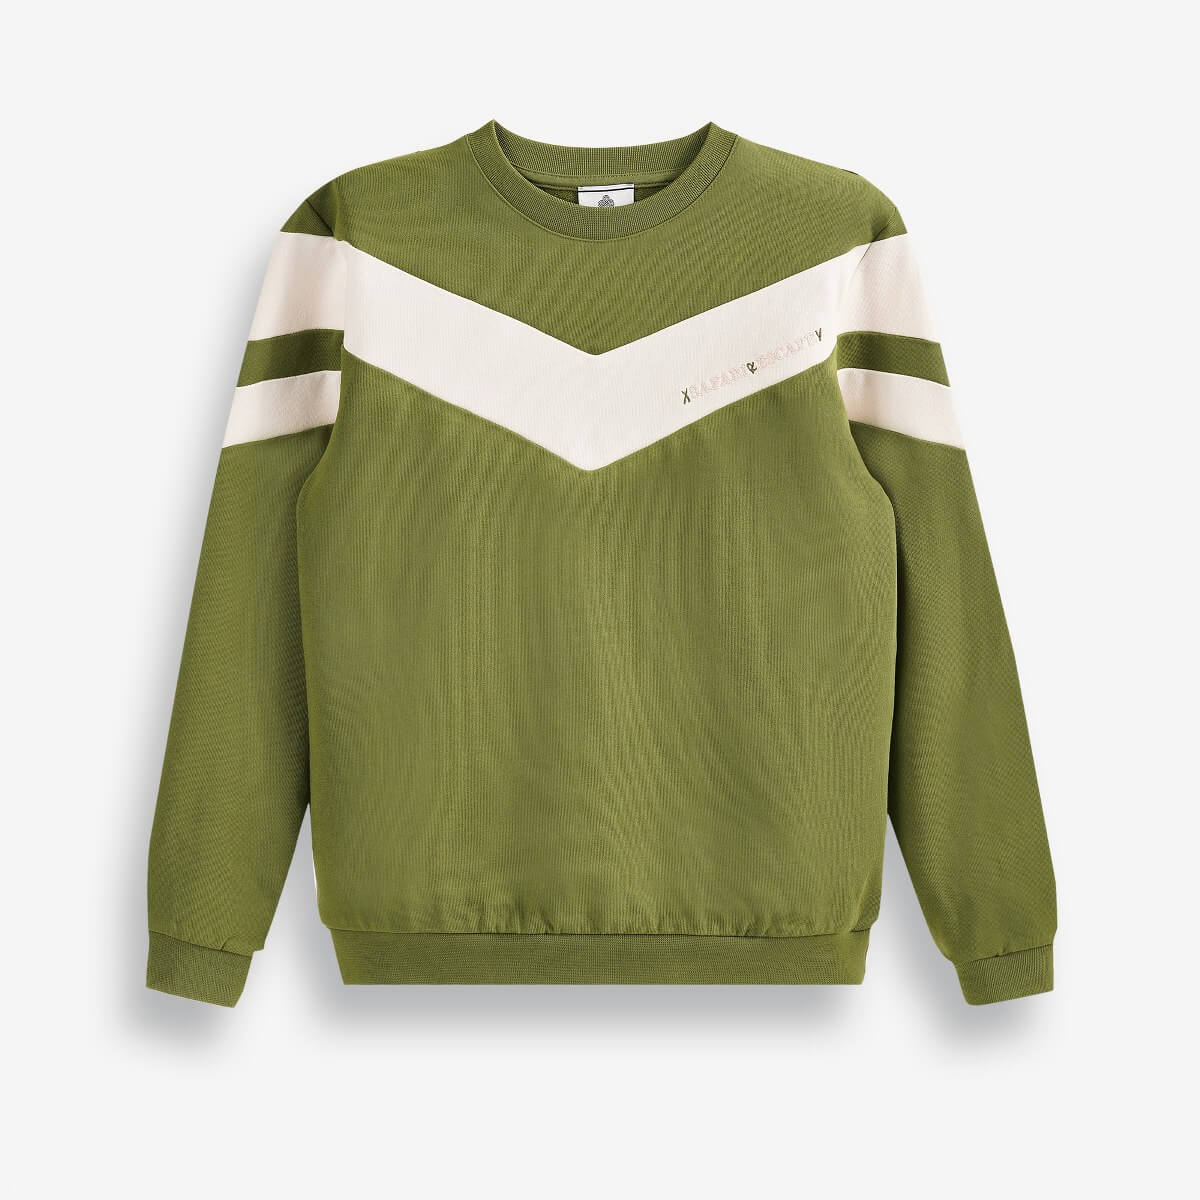 Boys' Sweatshirt with Soft Cuffs on the Sleeves and the Waist